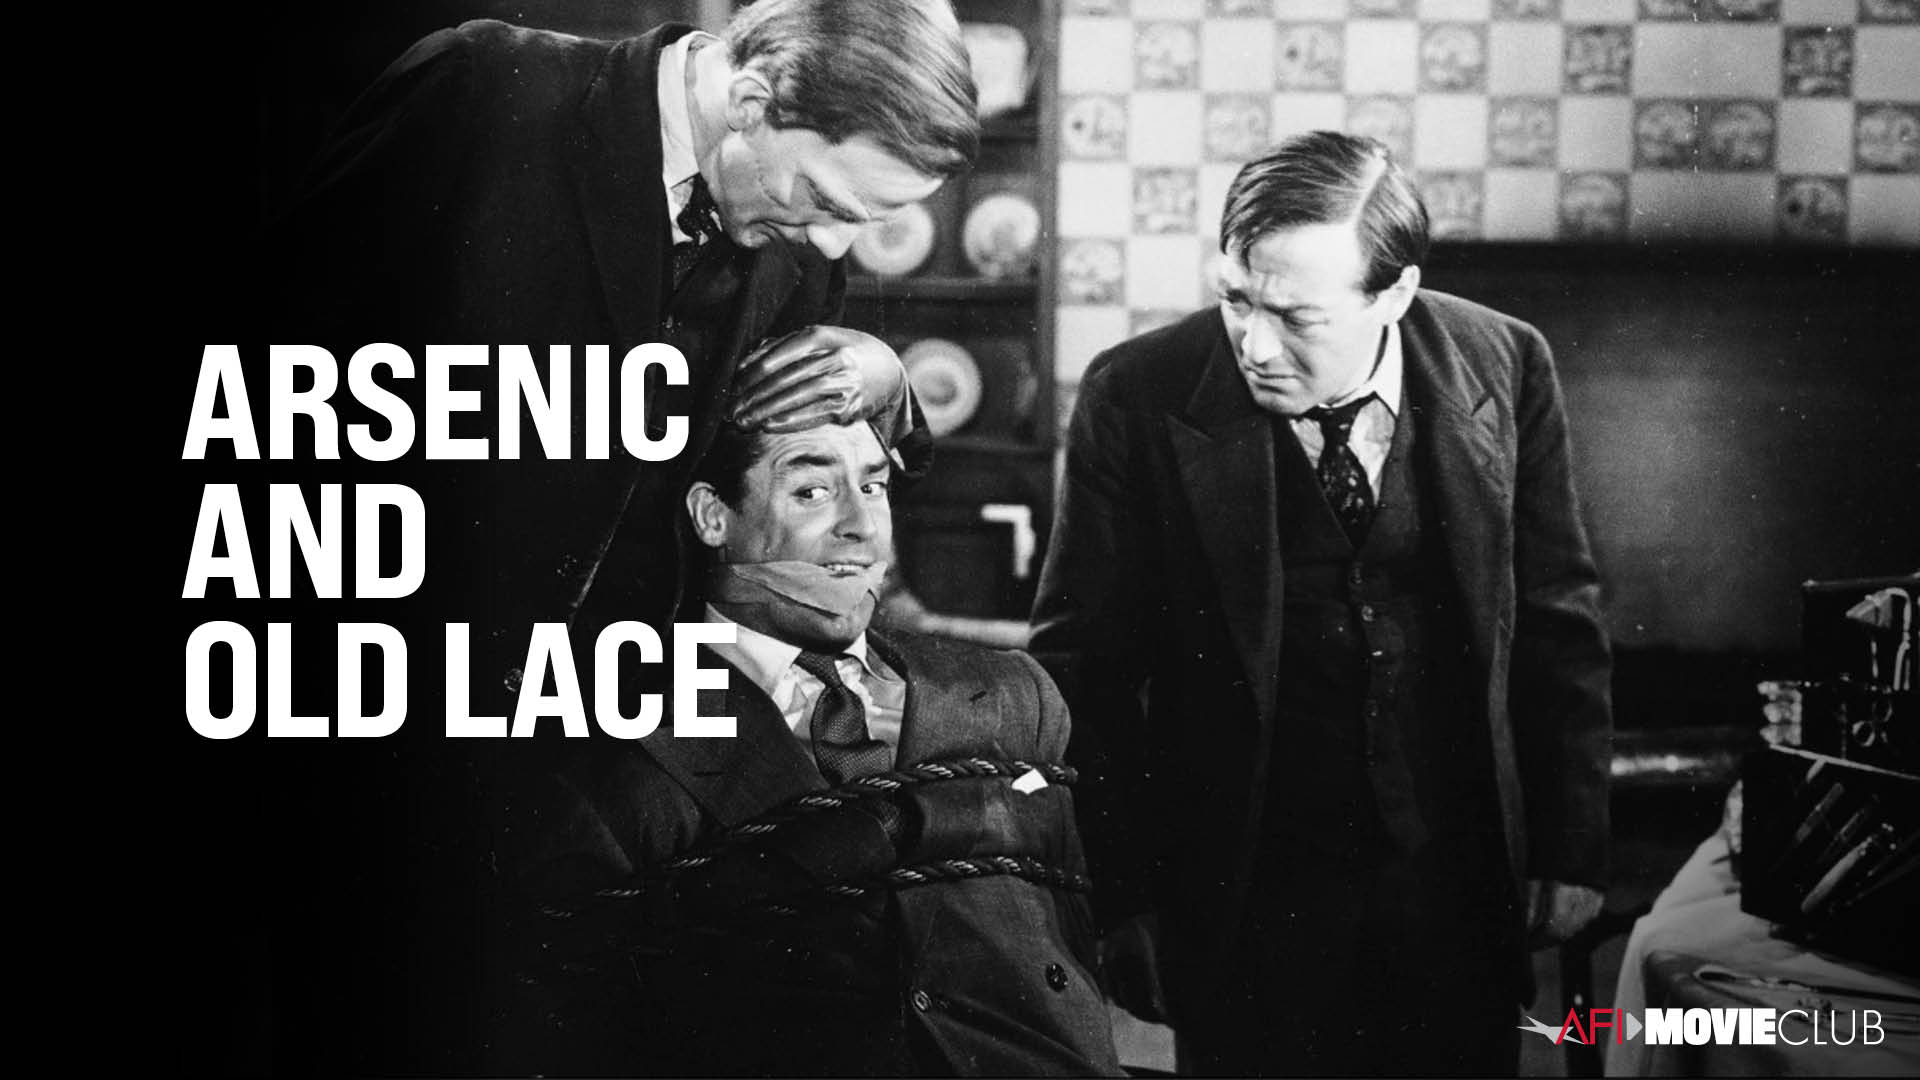 Arsenic and Old Lace Film Still - Cary Grant, Peter Lorre, and Raymond Massey